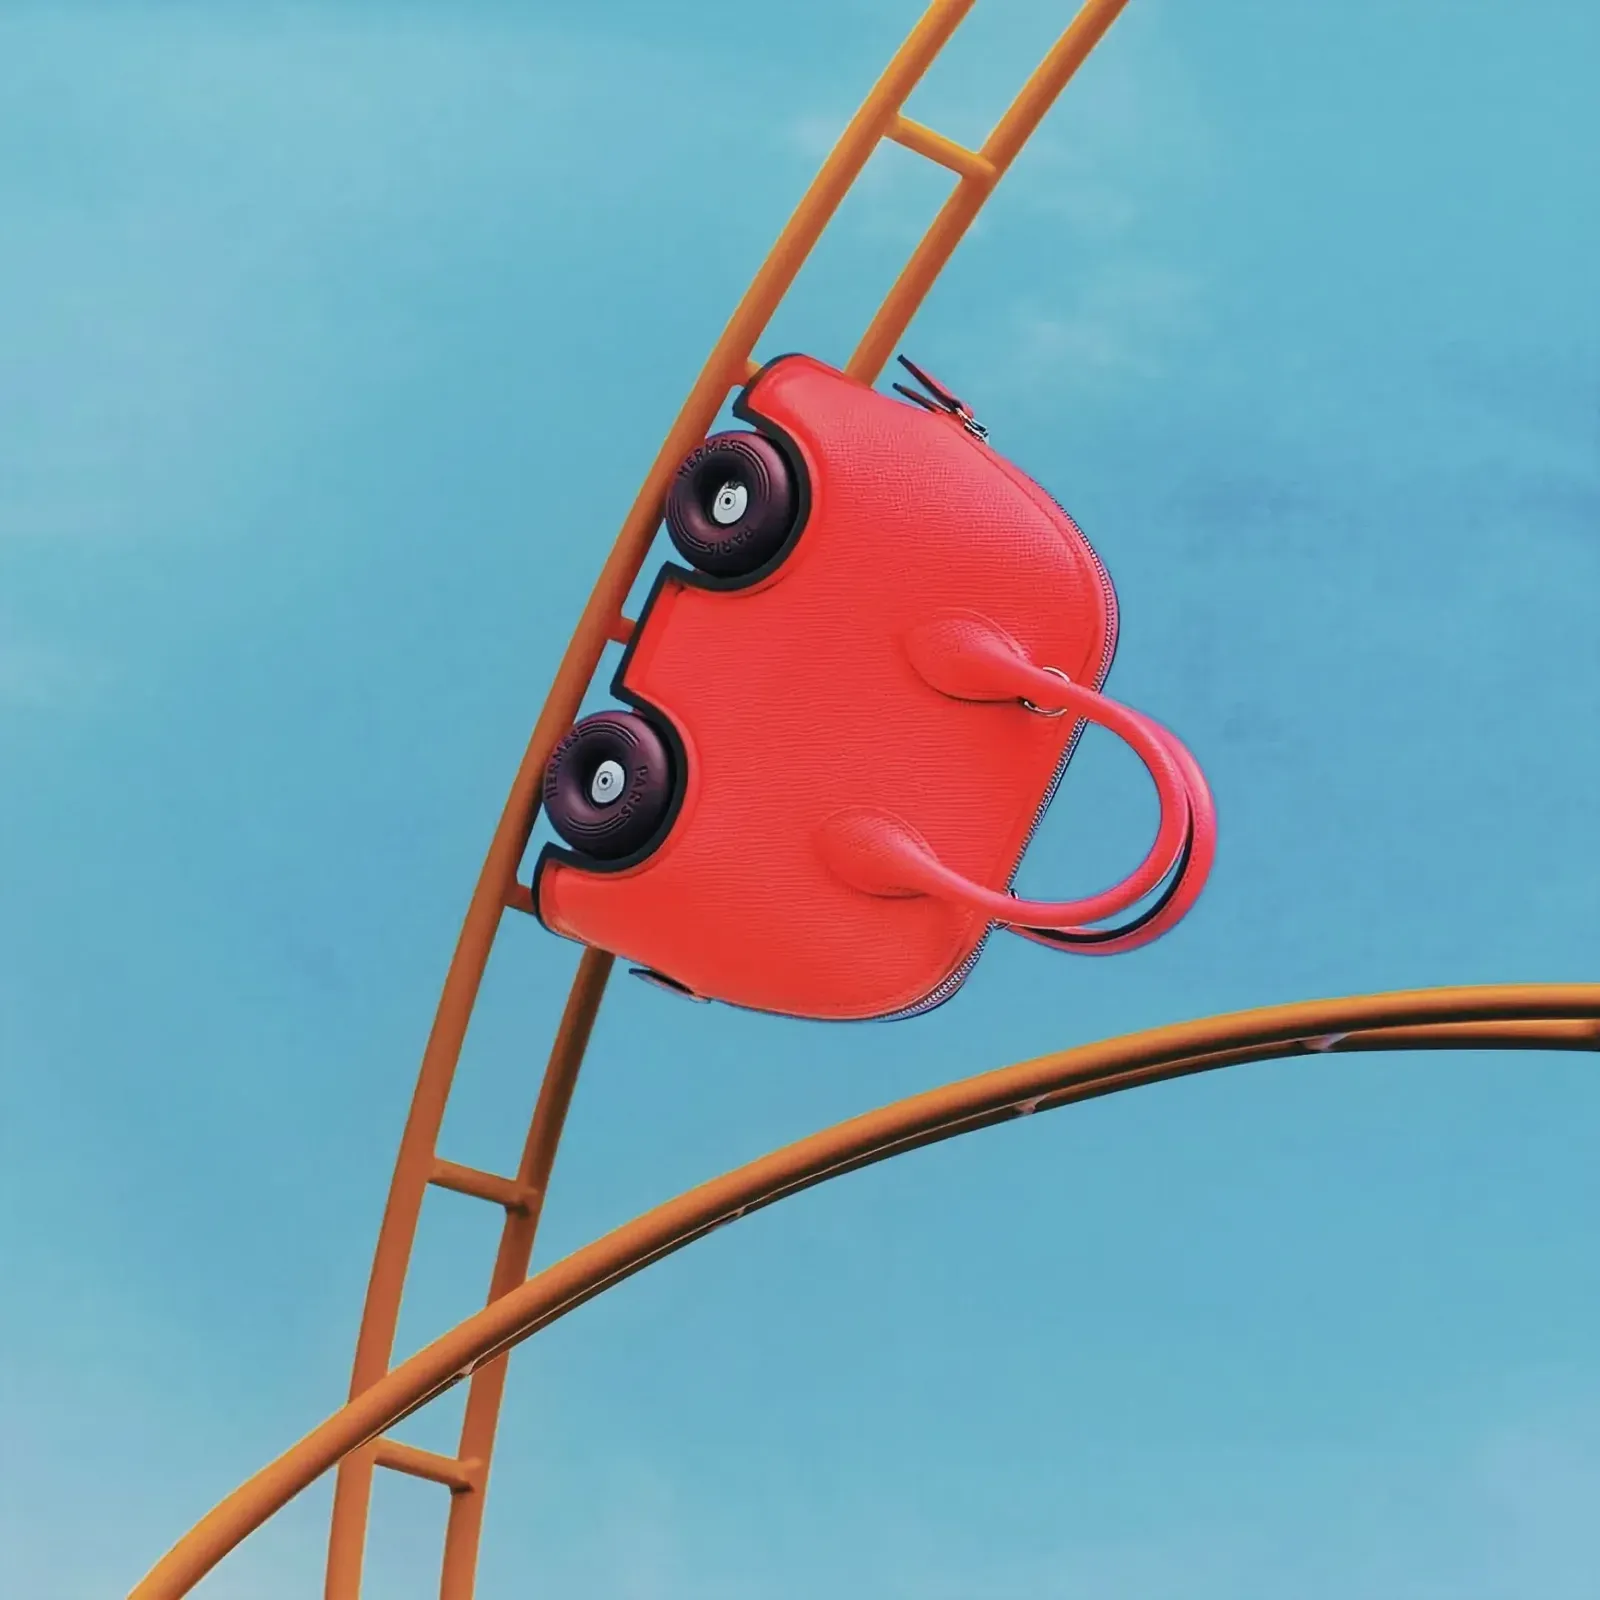 Red bag on a roller coaster at an amusement park